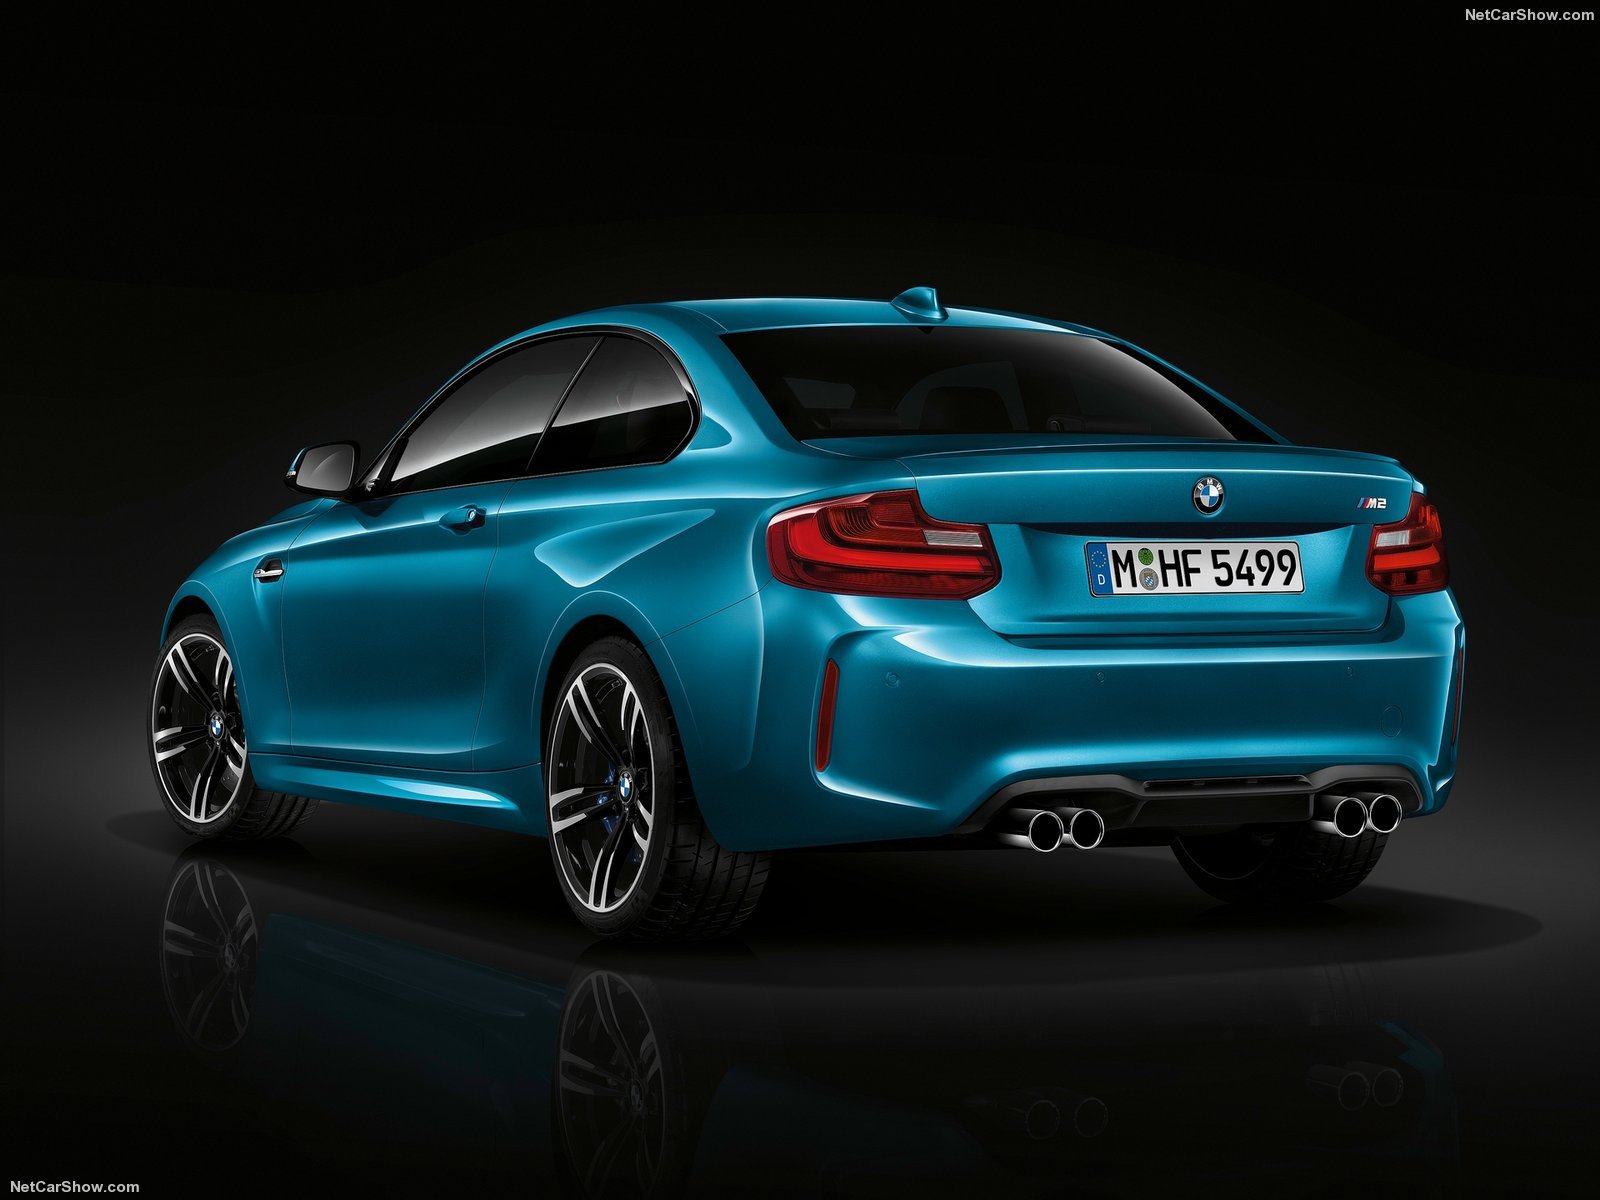 BMW M2 Coupe cars 2016 wallpaper 1600x1200 819370